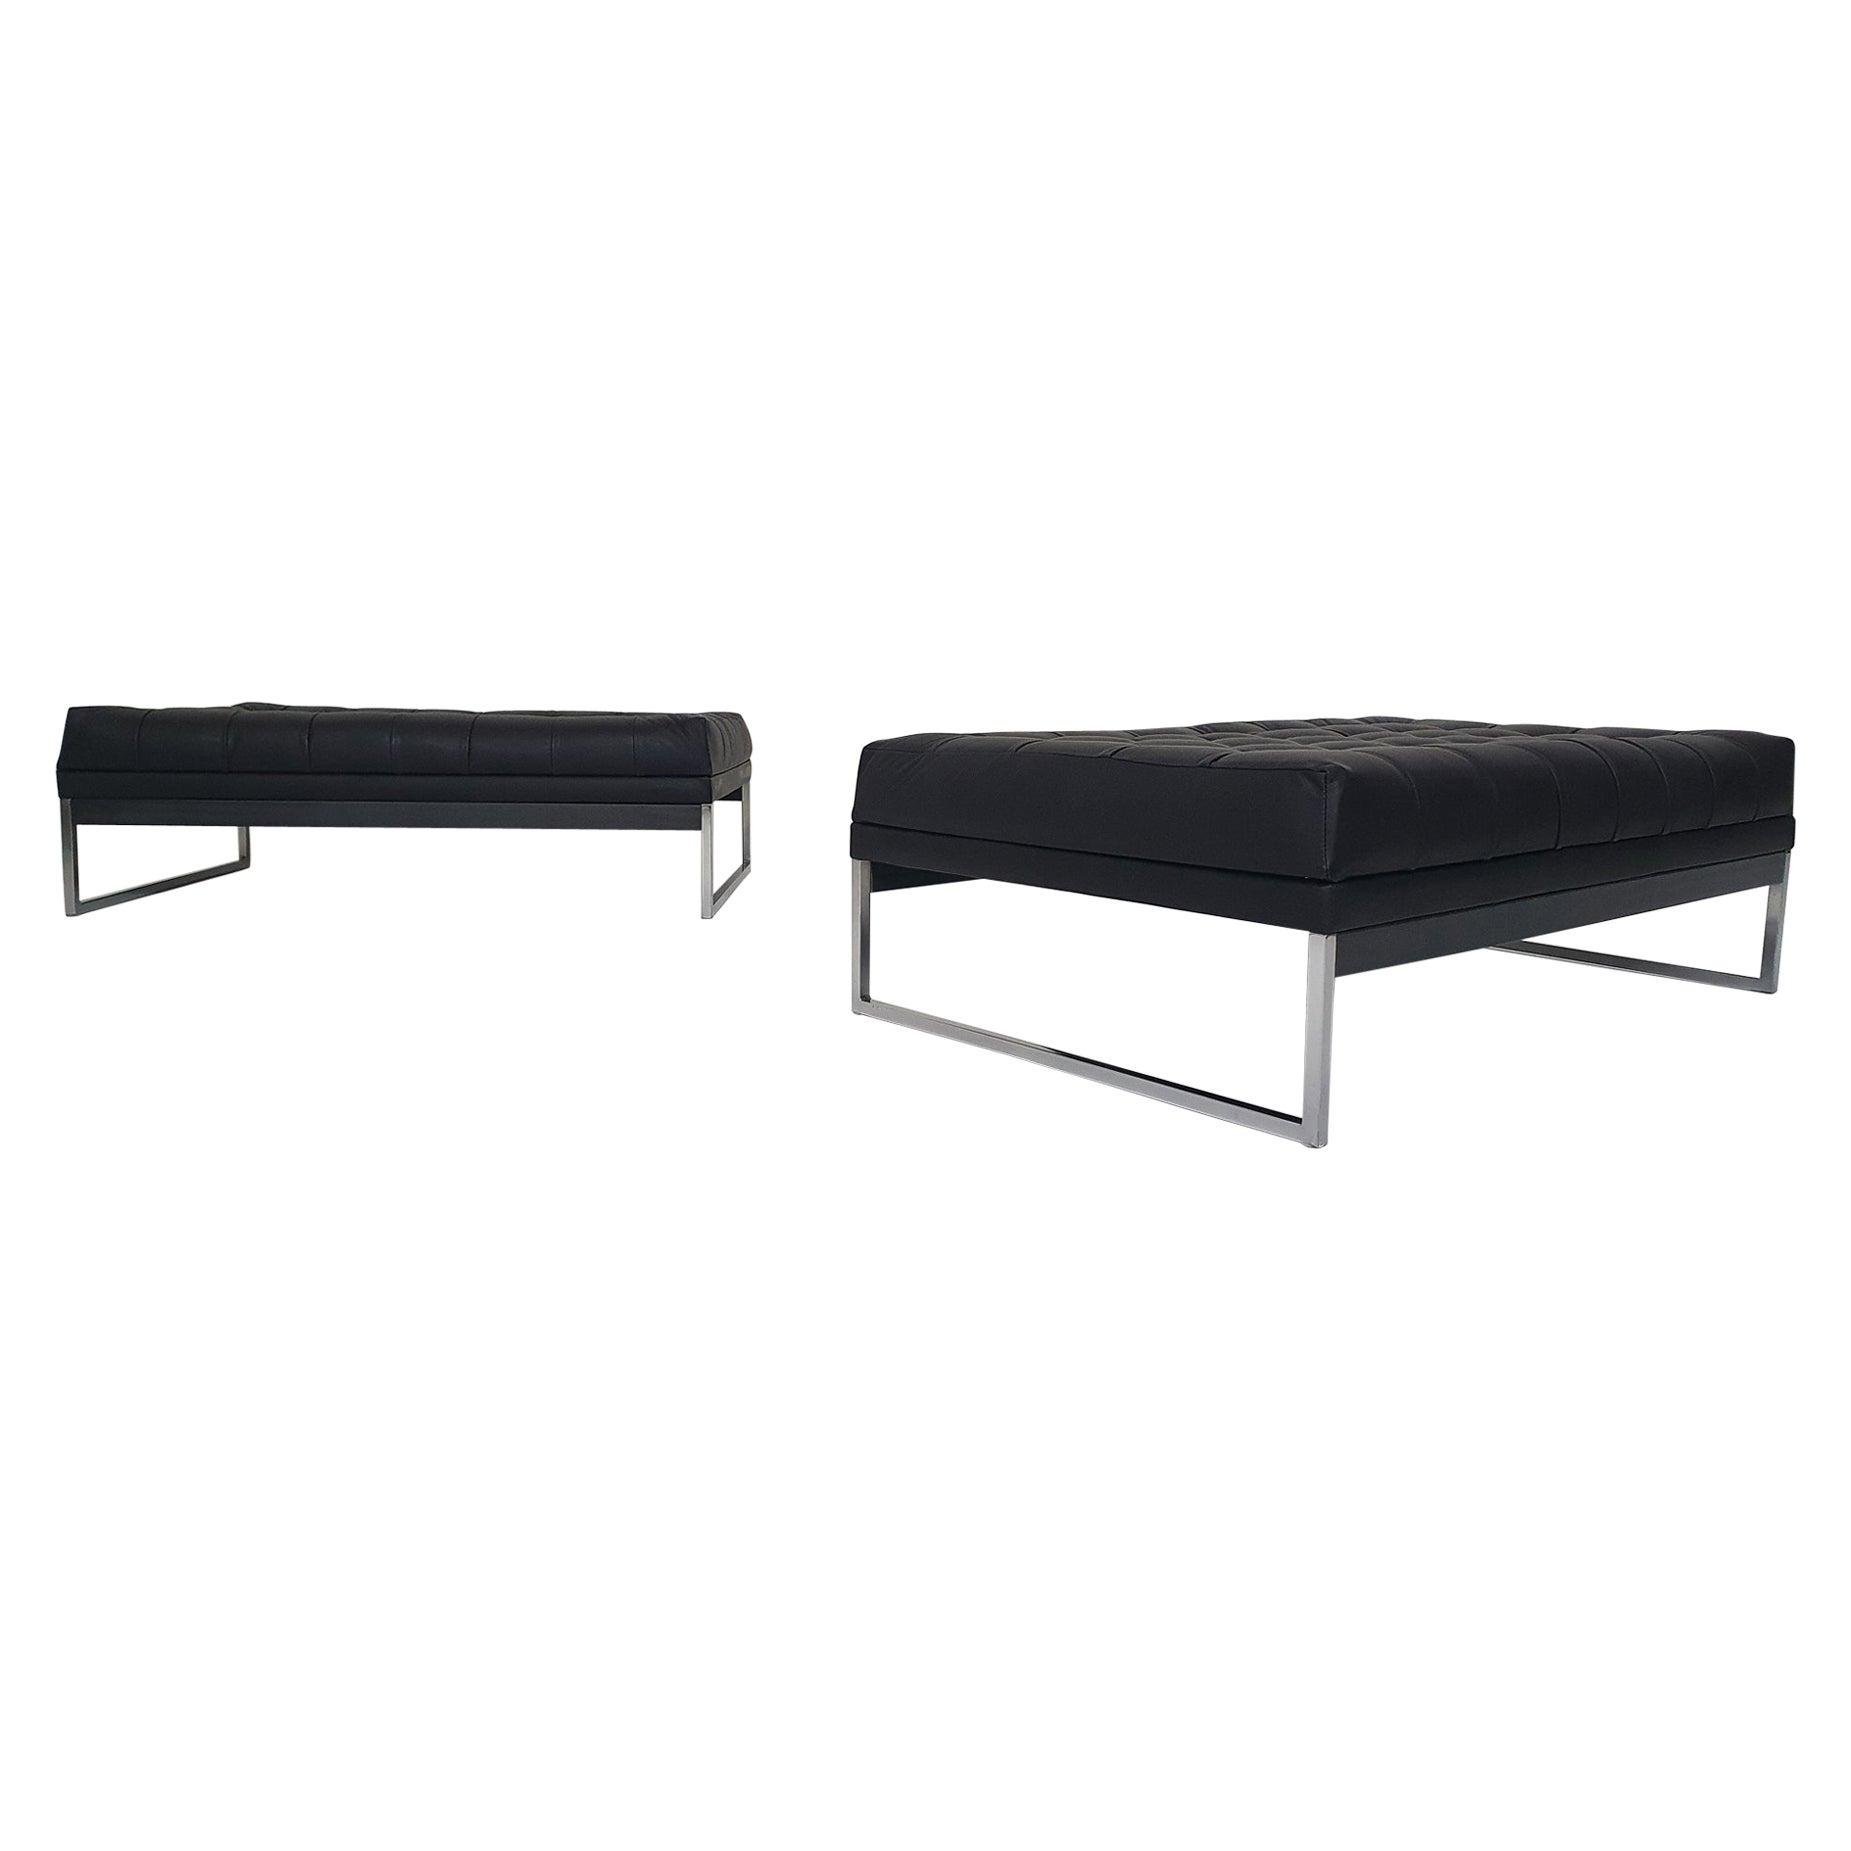 Set of Two Benches by AP-Originals, the Netherlands, 1960's